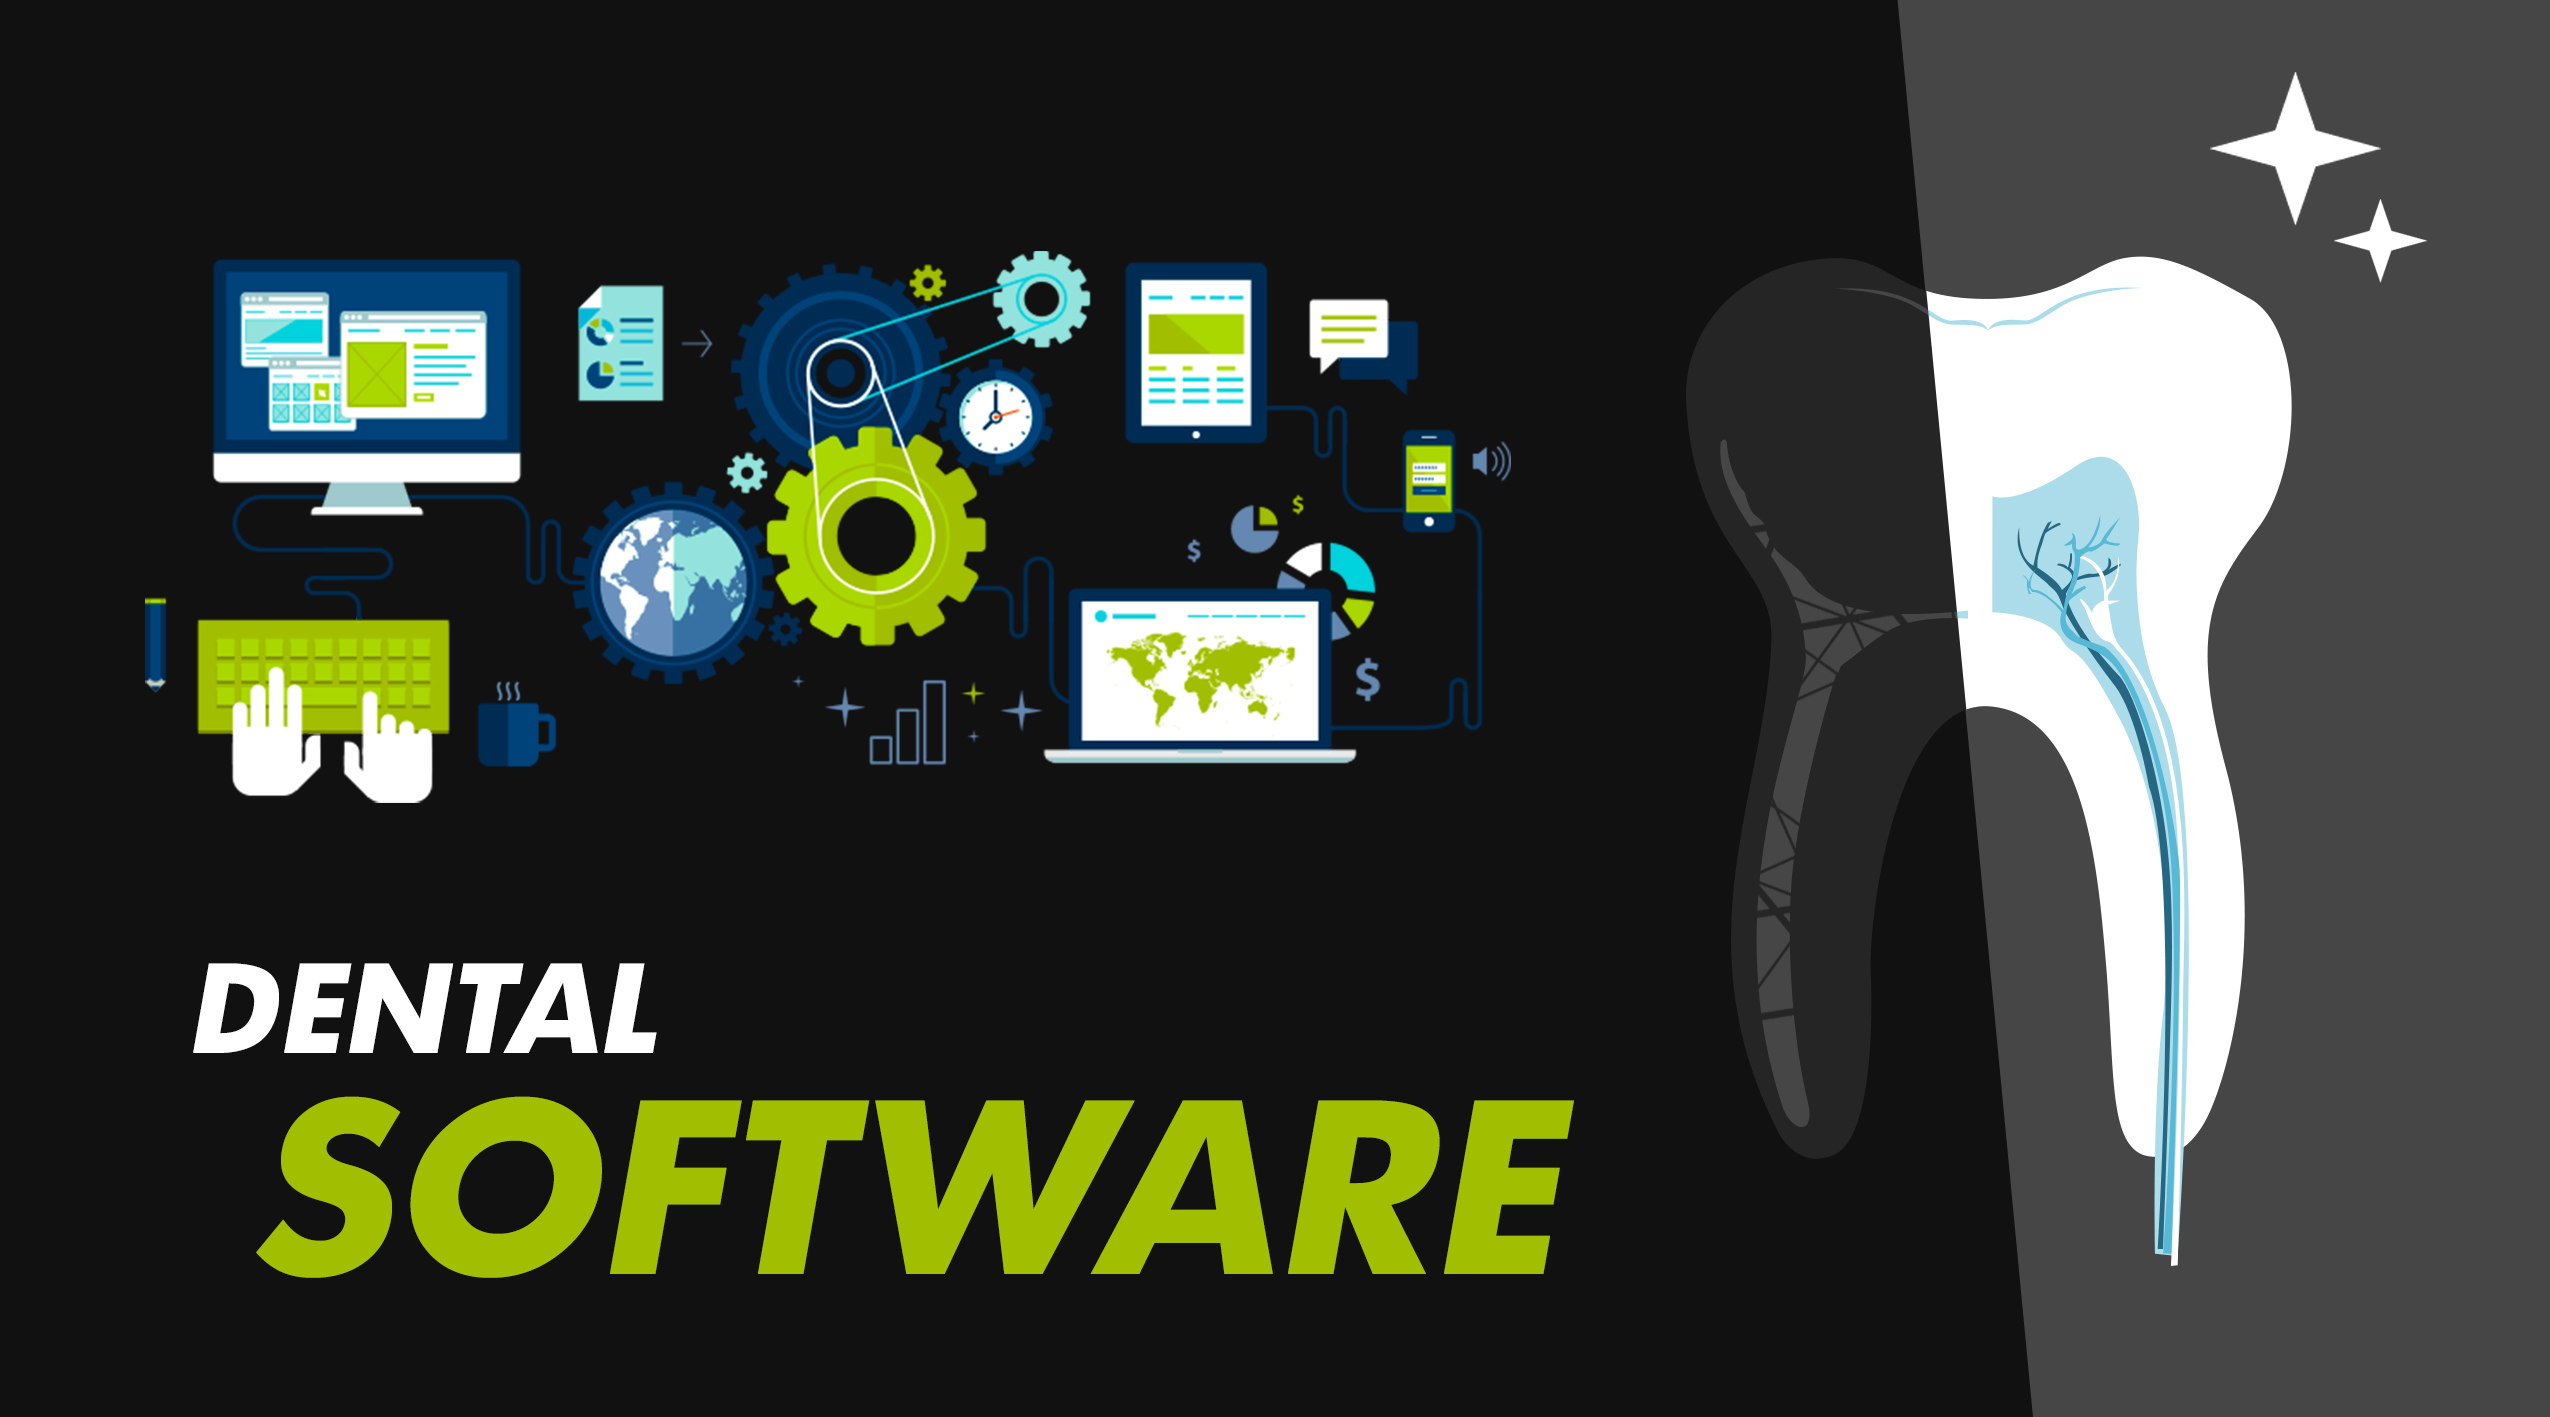 Explore Dental Software and Dental IT Support